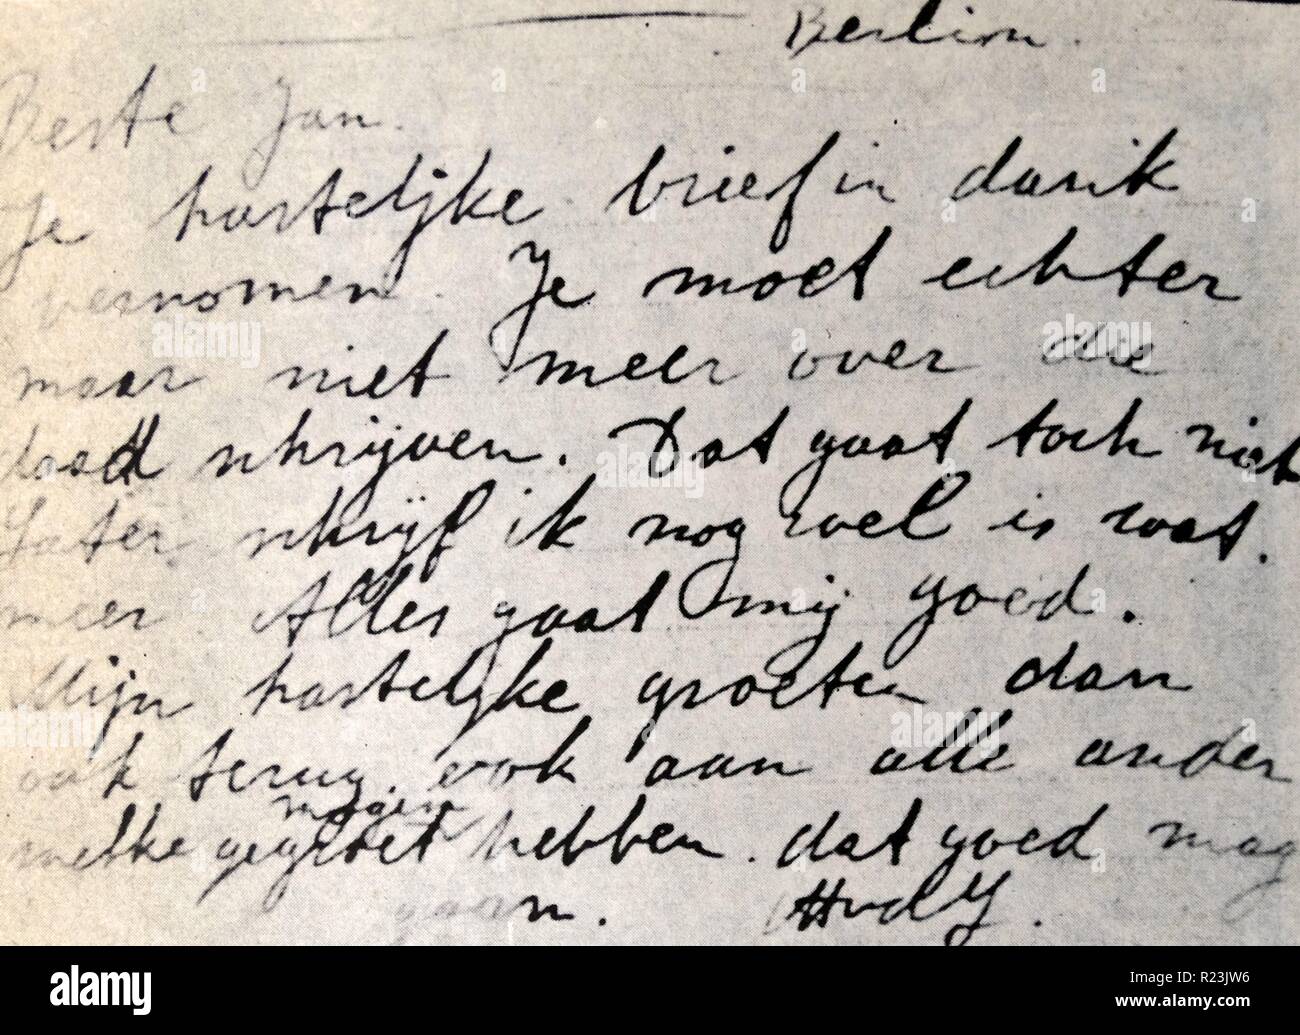 A letter from van der Lubbe (convicted for the Reichstag Fire in 1933) from prison. Stock Photo